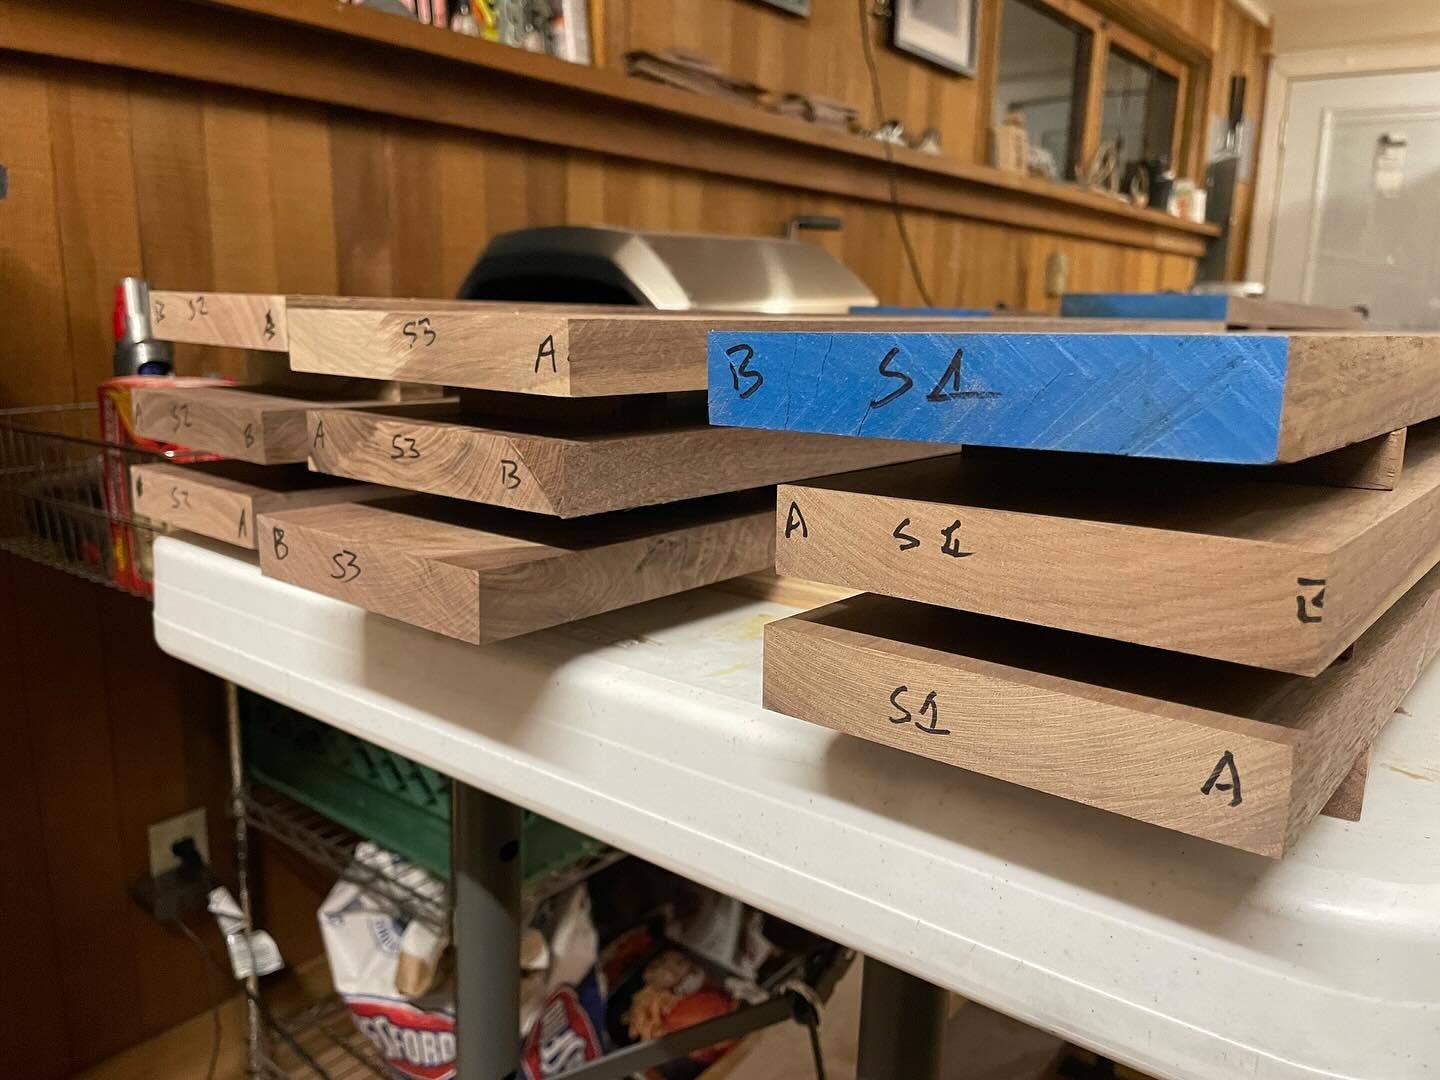 Sometimes a #sharpie is the best tool in the shop to keep all the boards organized. We are starting to have this look less like a random pile of wood and more like a piece of furniture!  #custommade #customfurniture #woodworker #woodoworking #interio